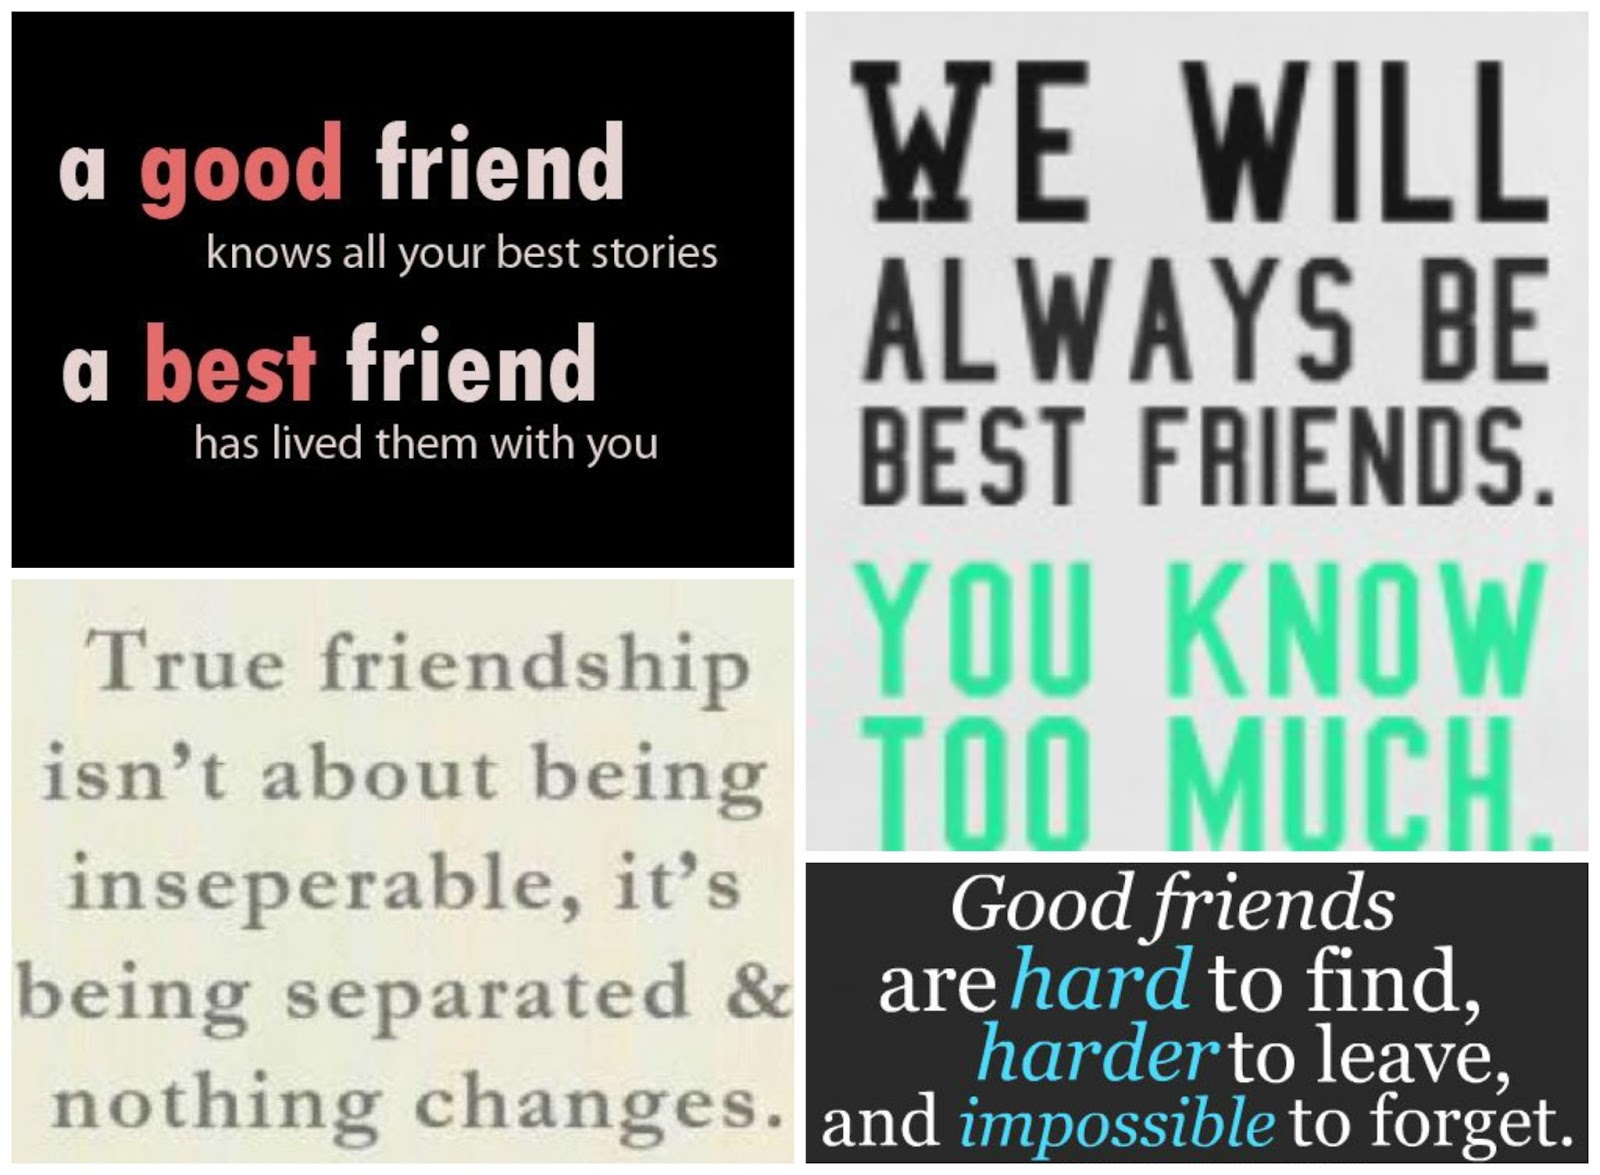 Quotes About Friends Getting Together. QuotesGram